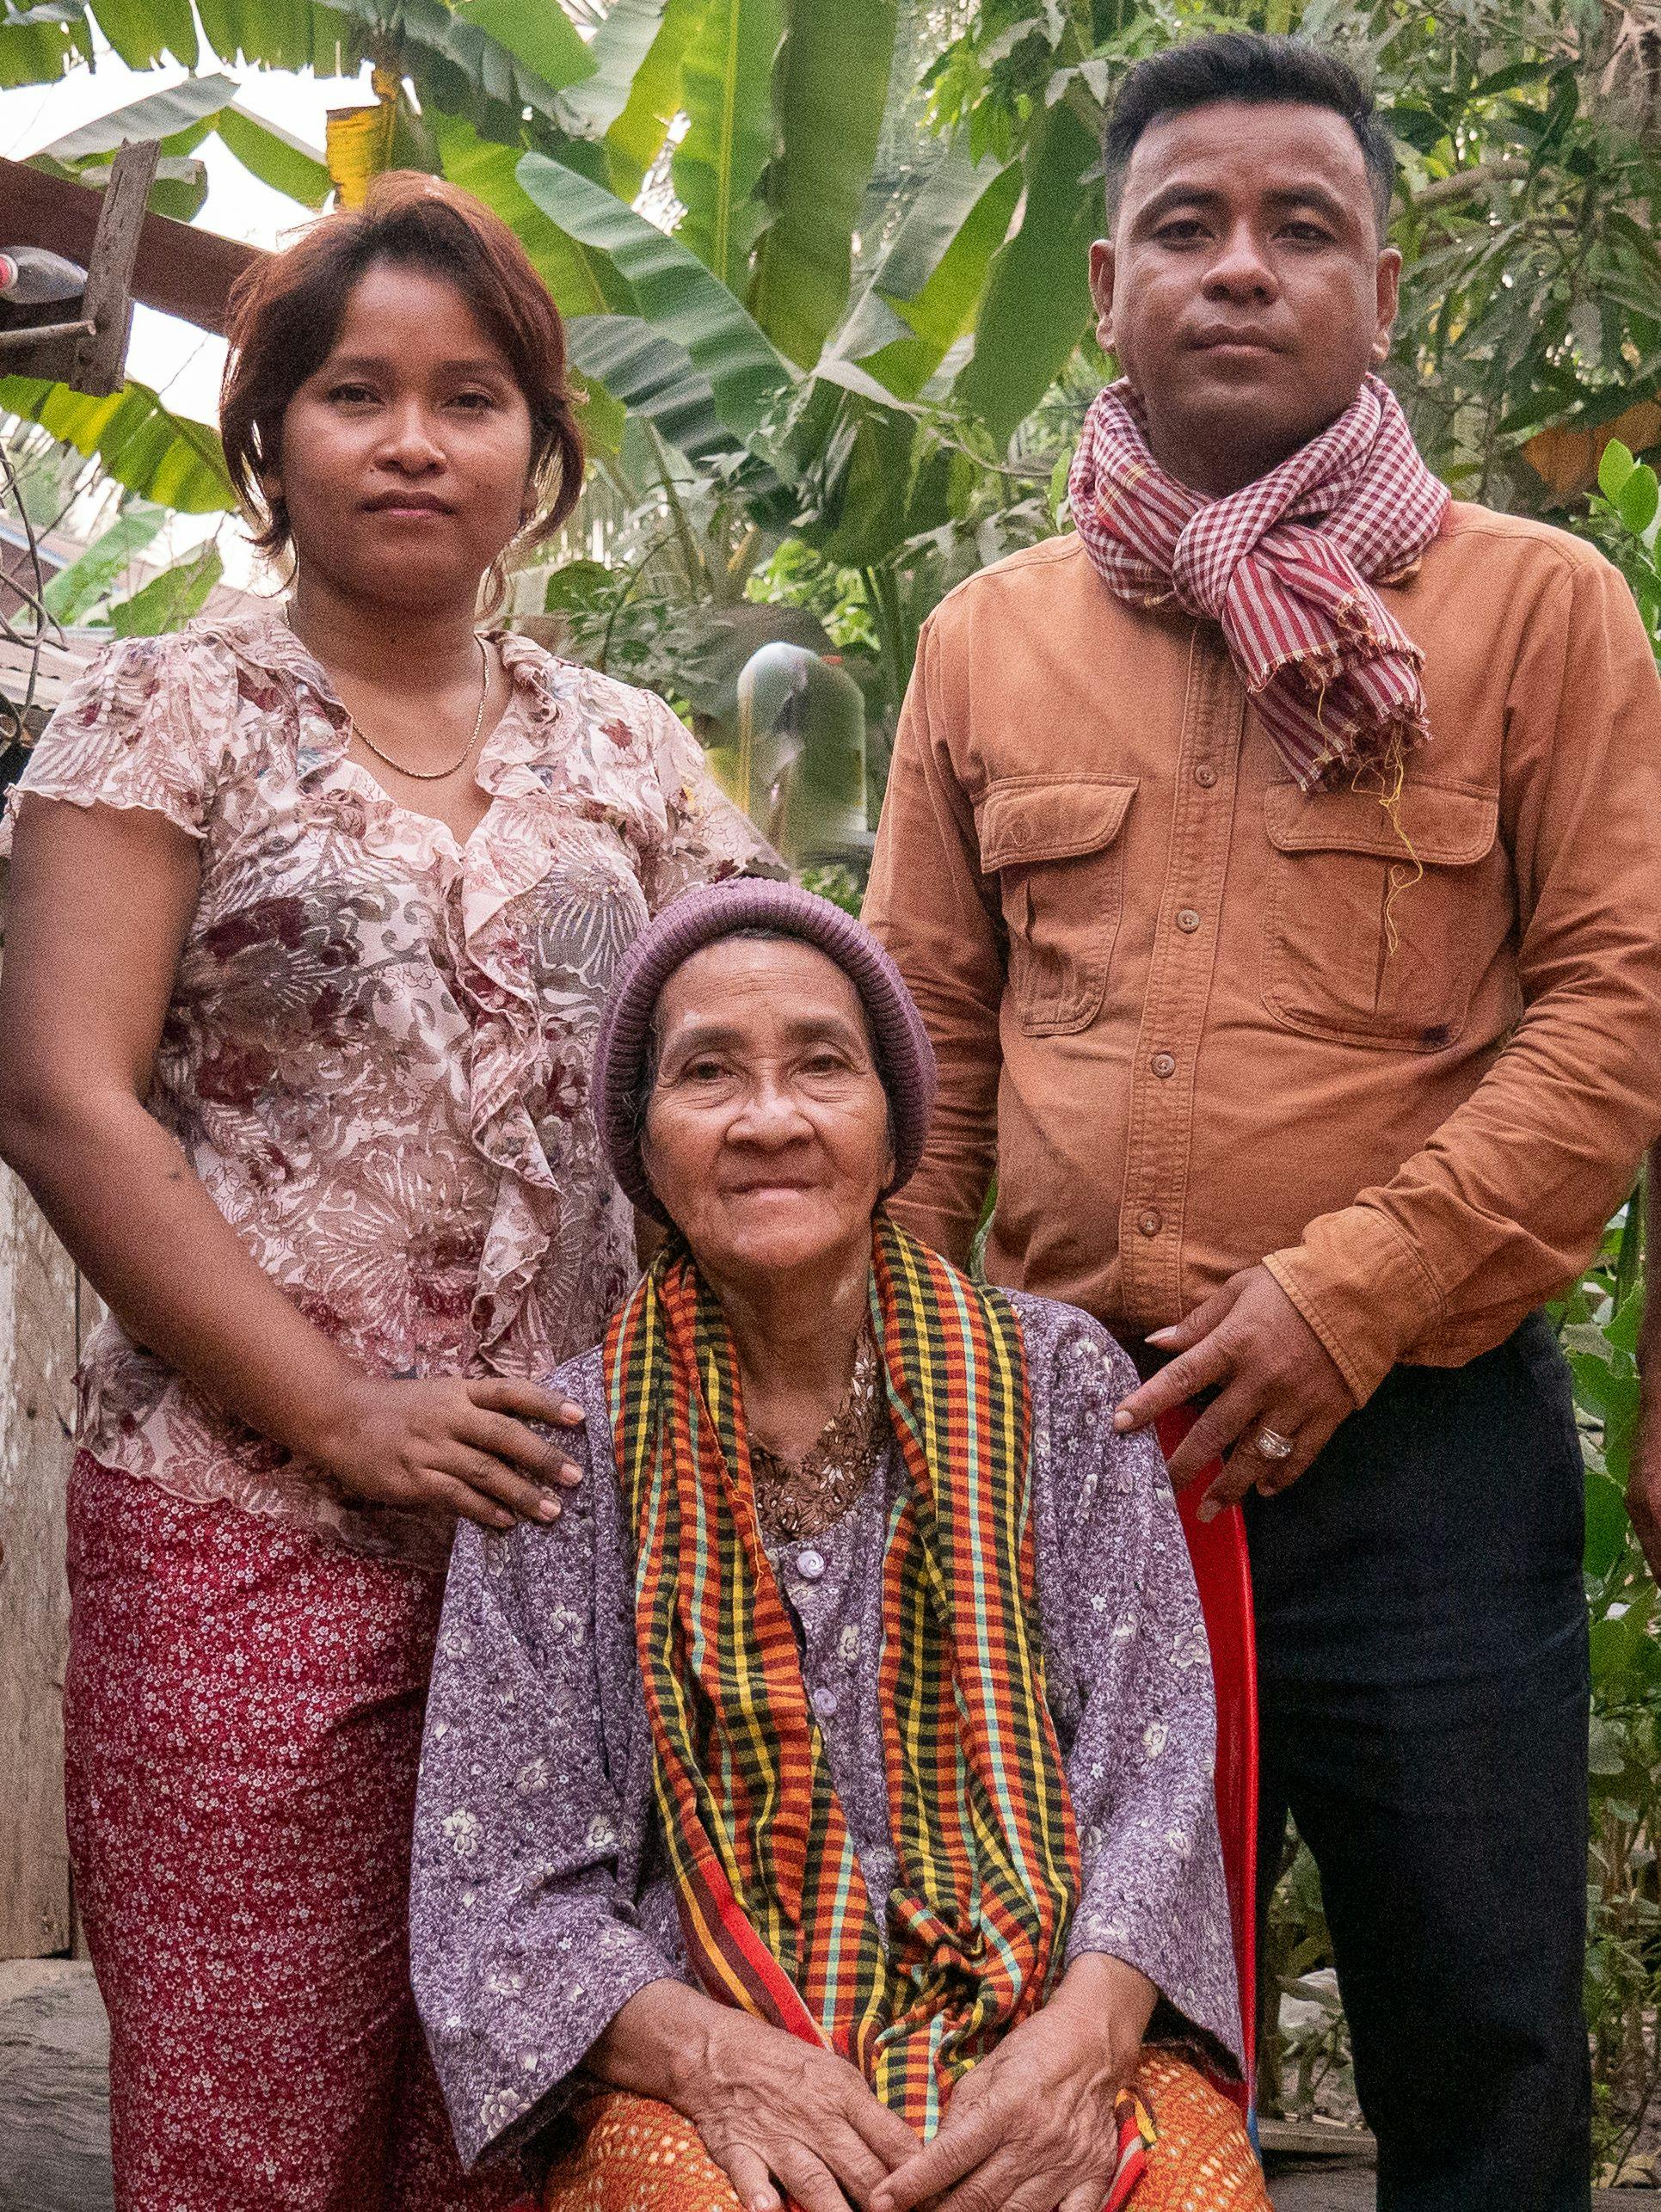 Figure 5. Siblings KOEUY Leakhena and KOEUY Reatha with their mother LAV Mech (seated), wife of angkuoch-maker MONG Koeuy. Photo: Catherine Grant, 17 January 2020.